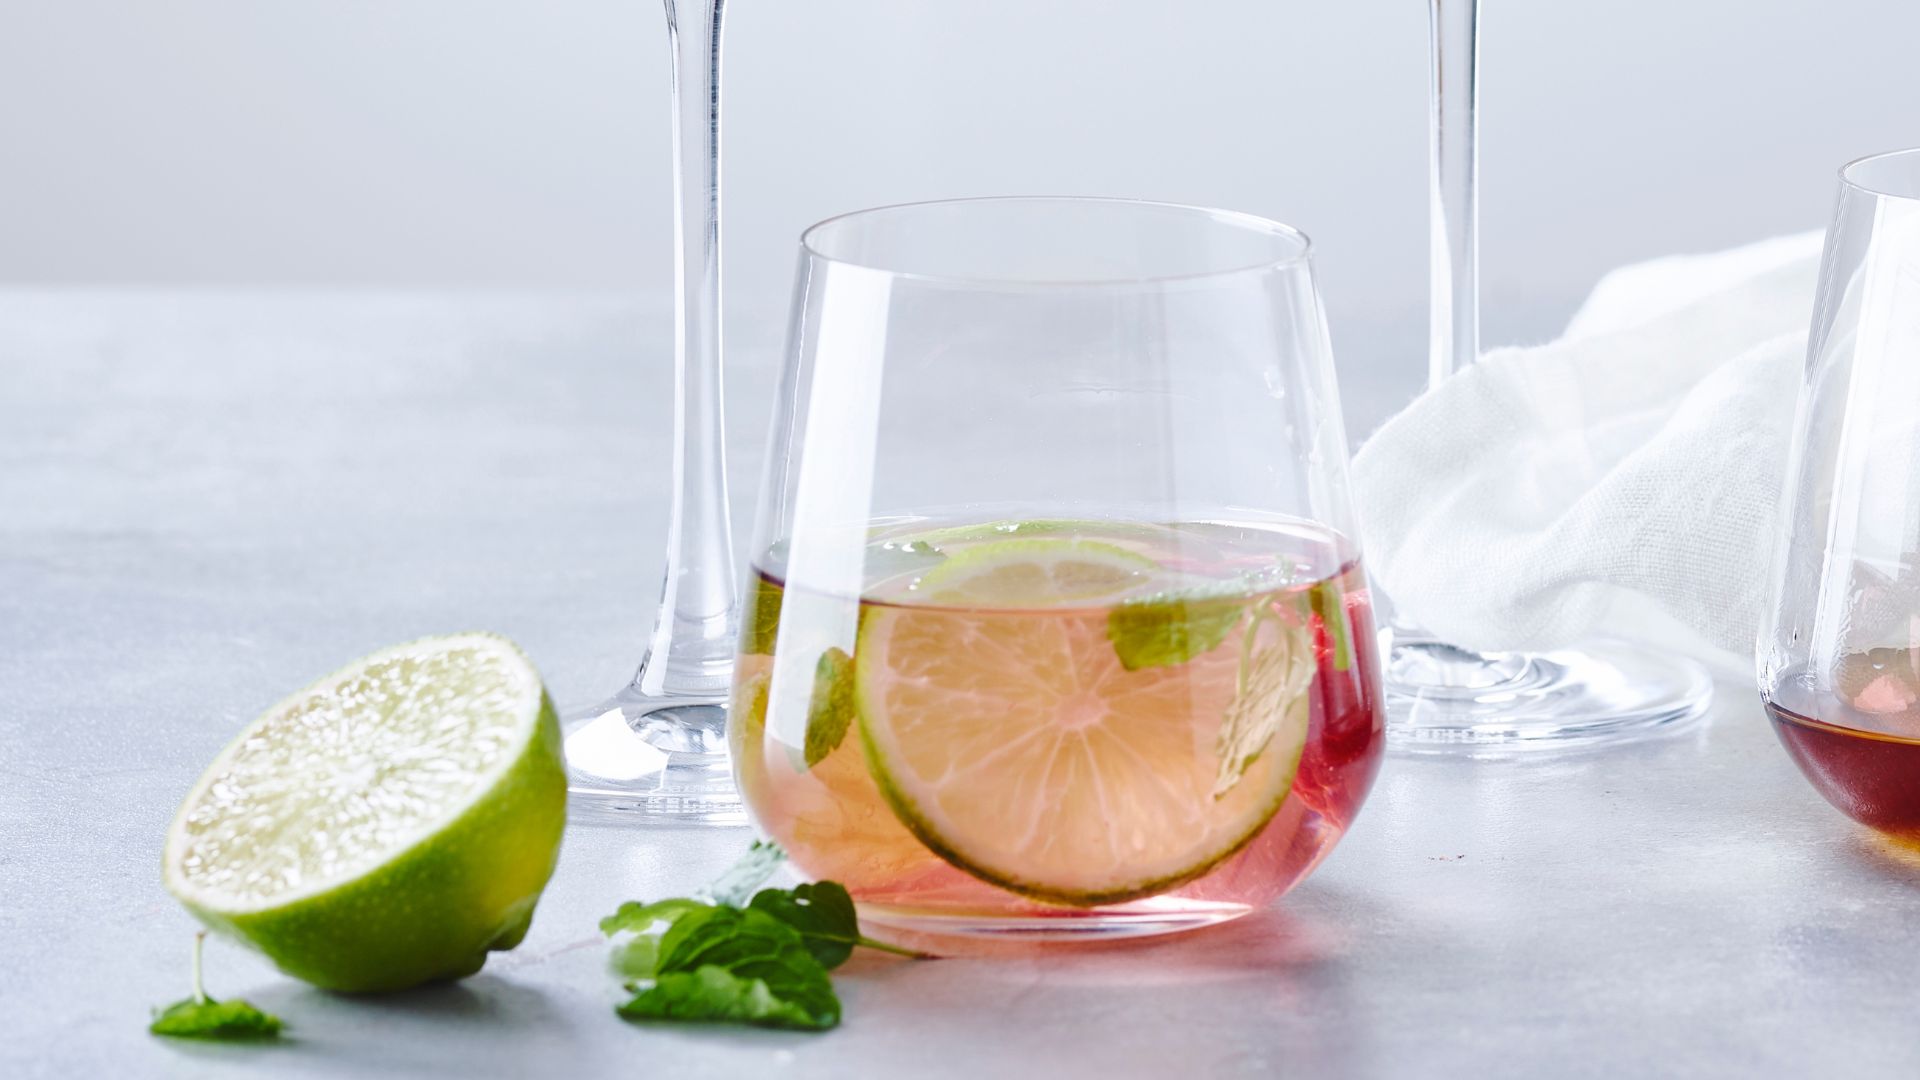 How To Make The Best Mocktails: Discover The Art Of Non-Alcoholic Mixology At Home